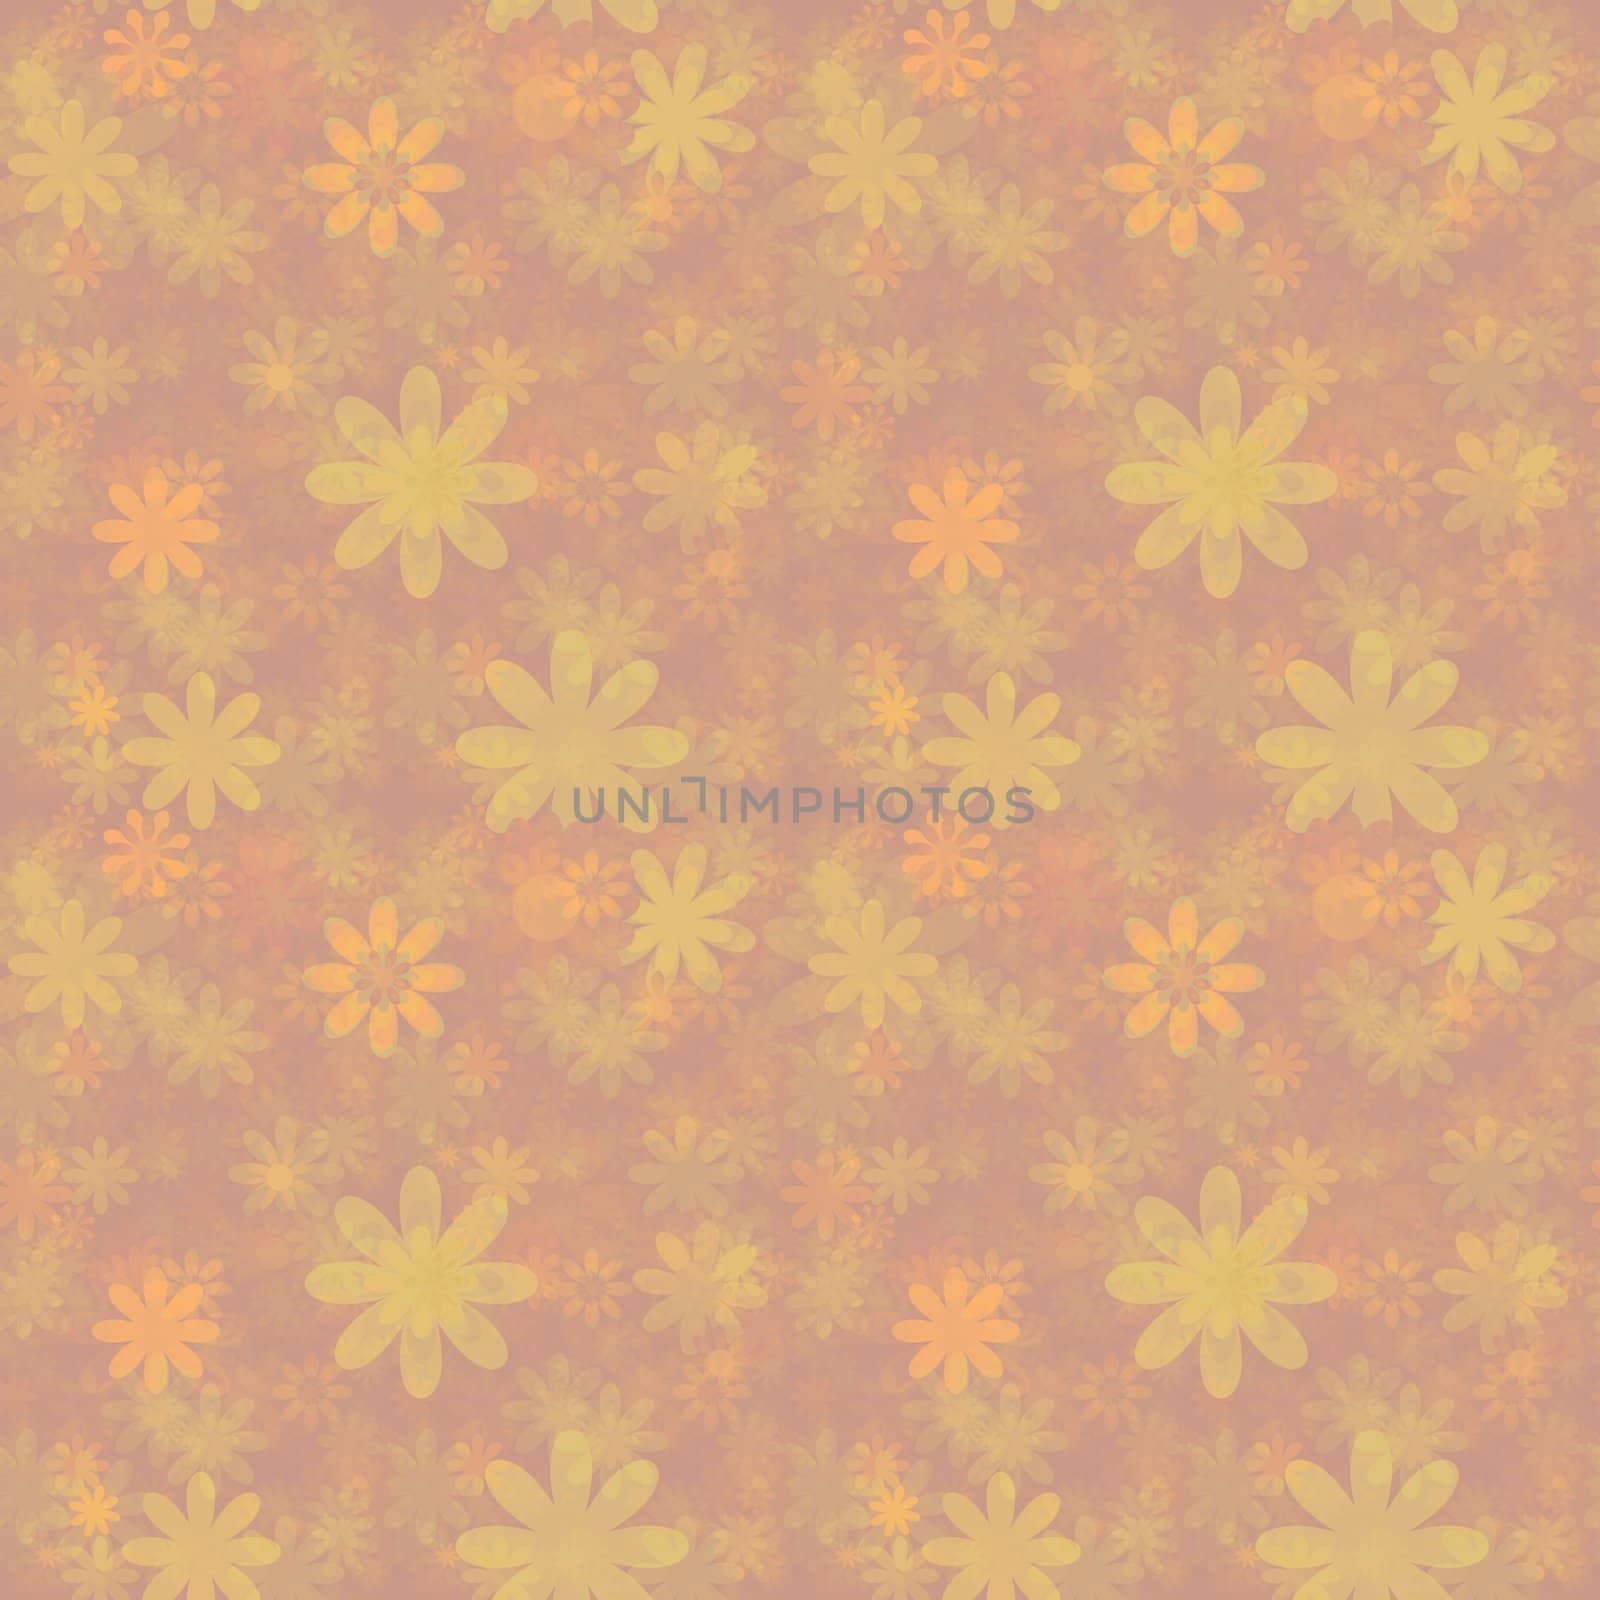 Illustration of a seamless floral background